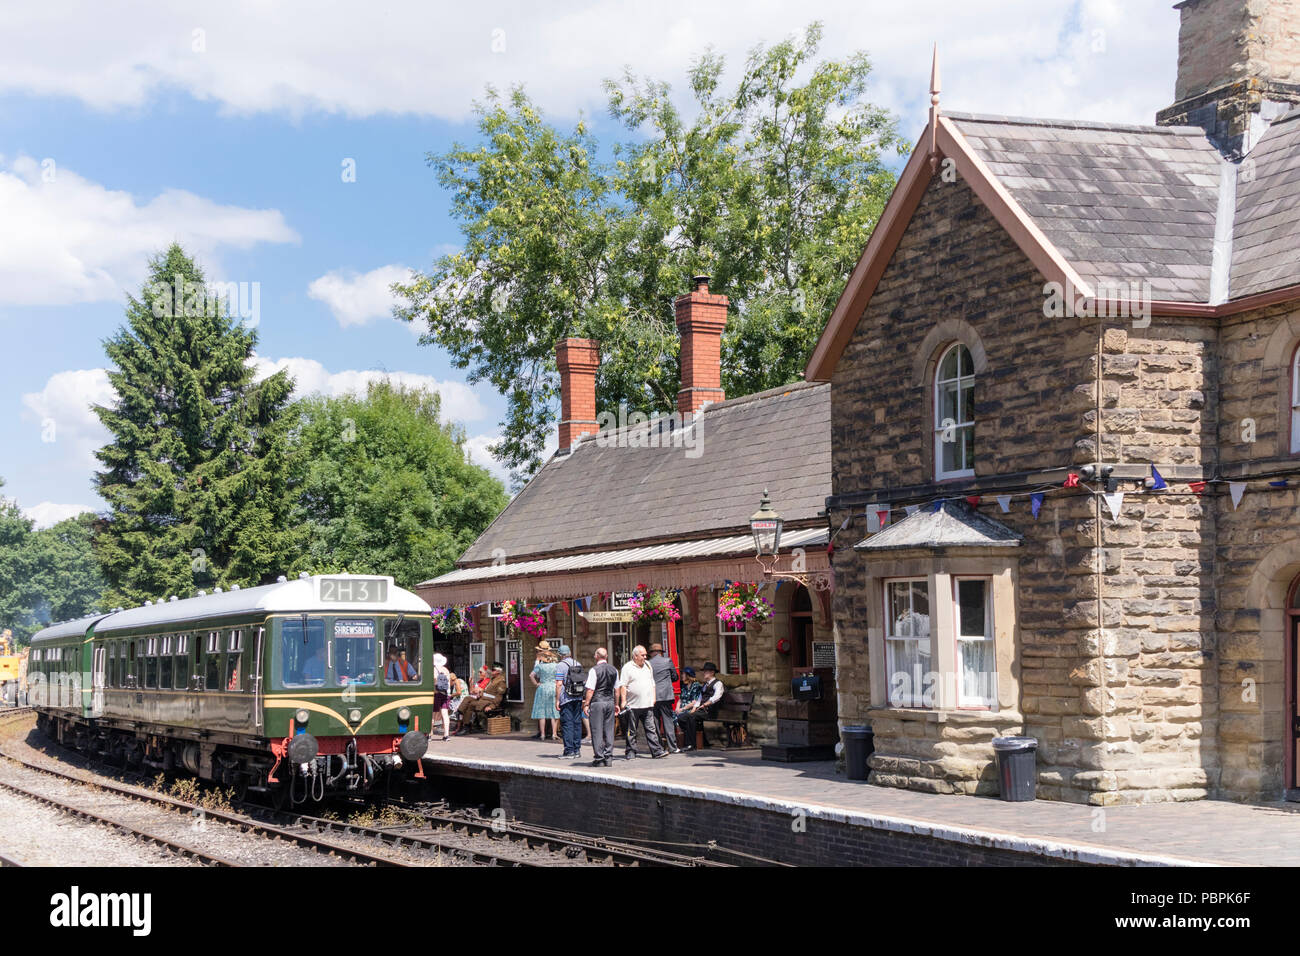 Diesel train at Highley station on the Severn Valley Railway heritage railway line in Shropshire, Stock Photo